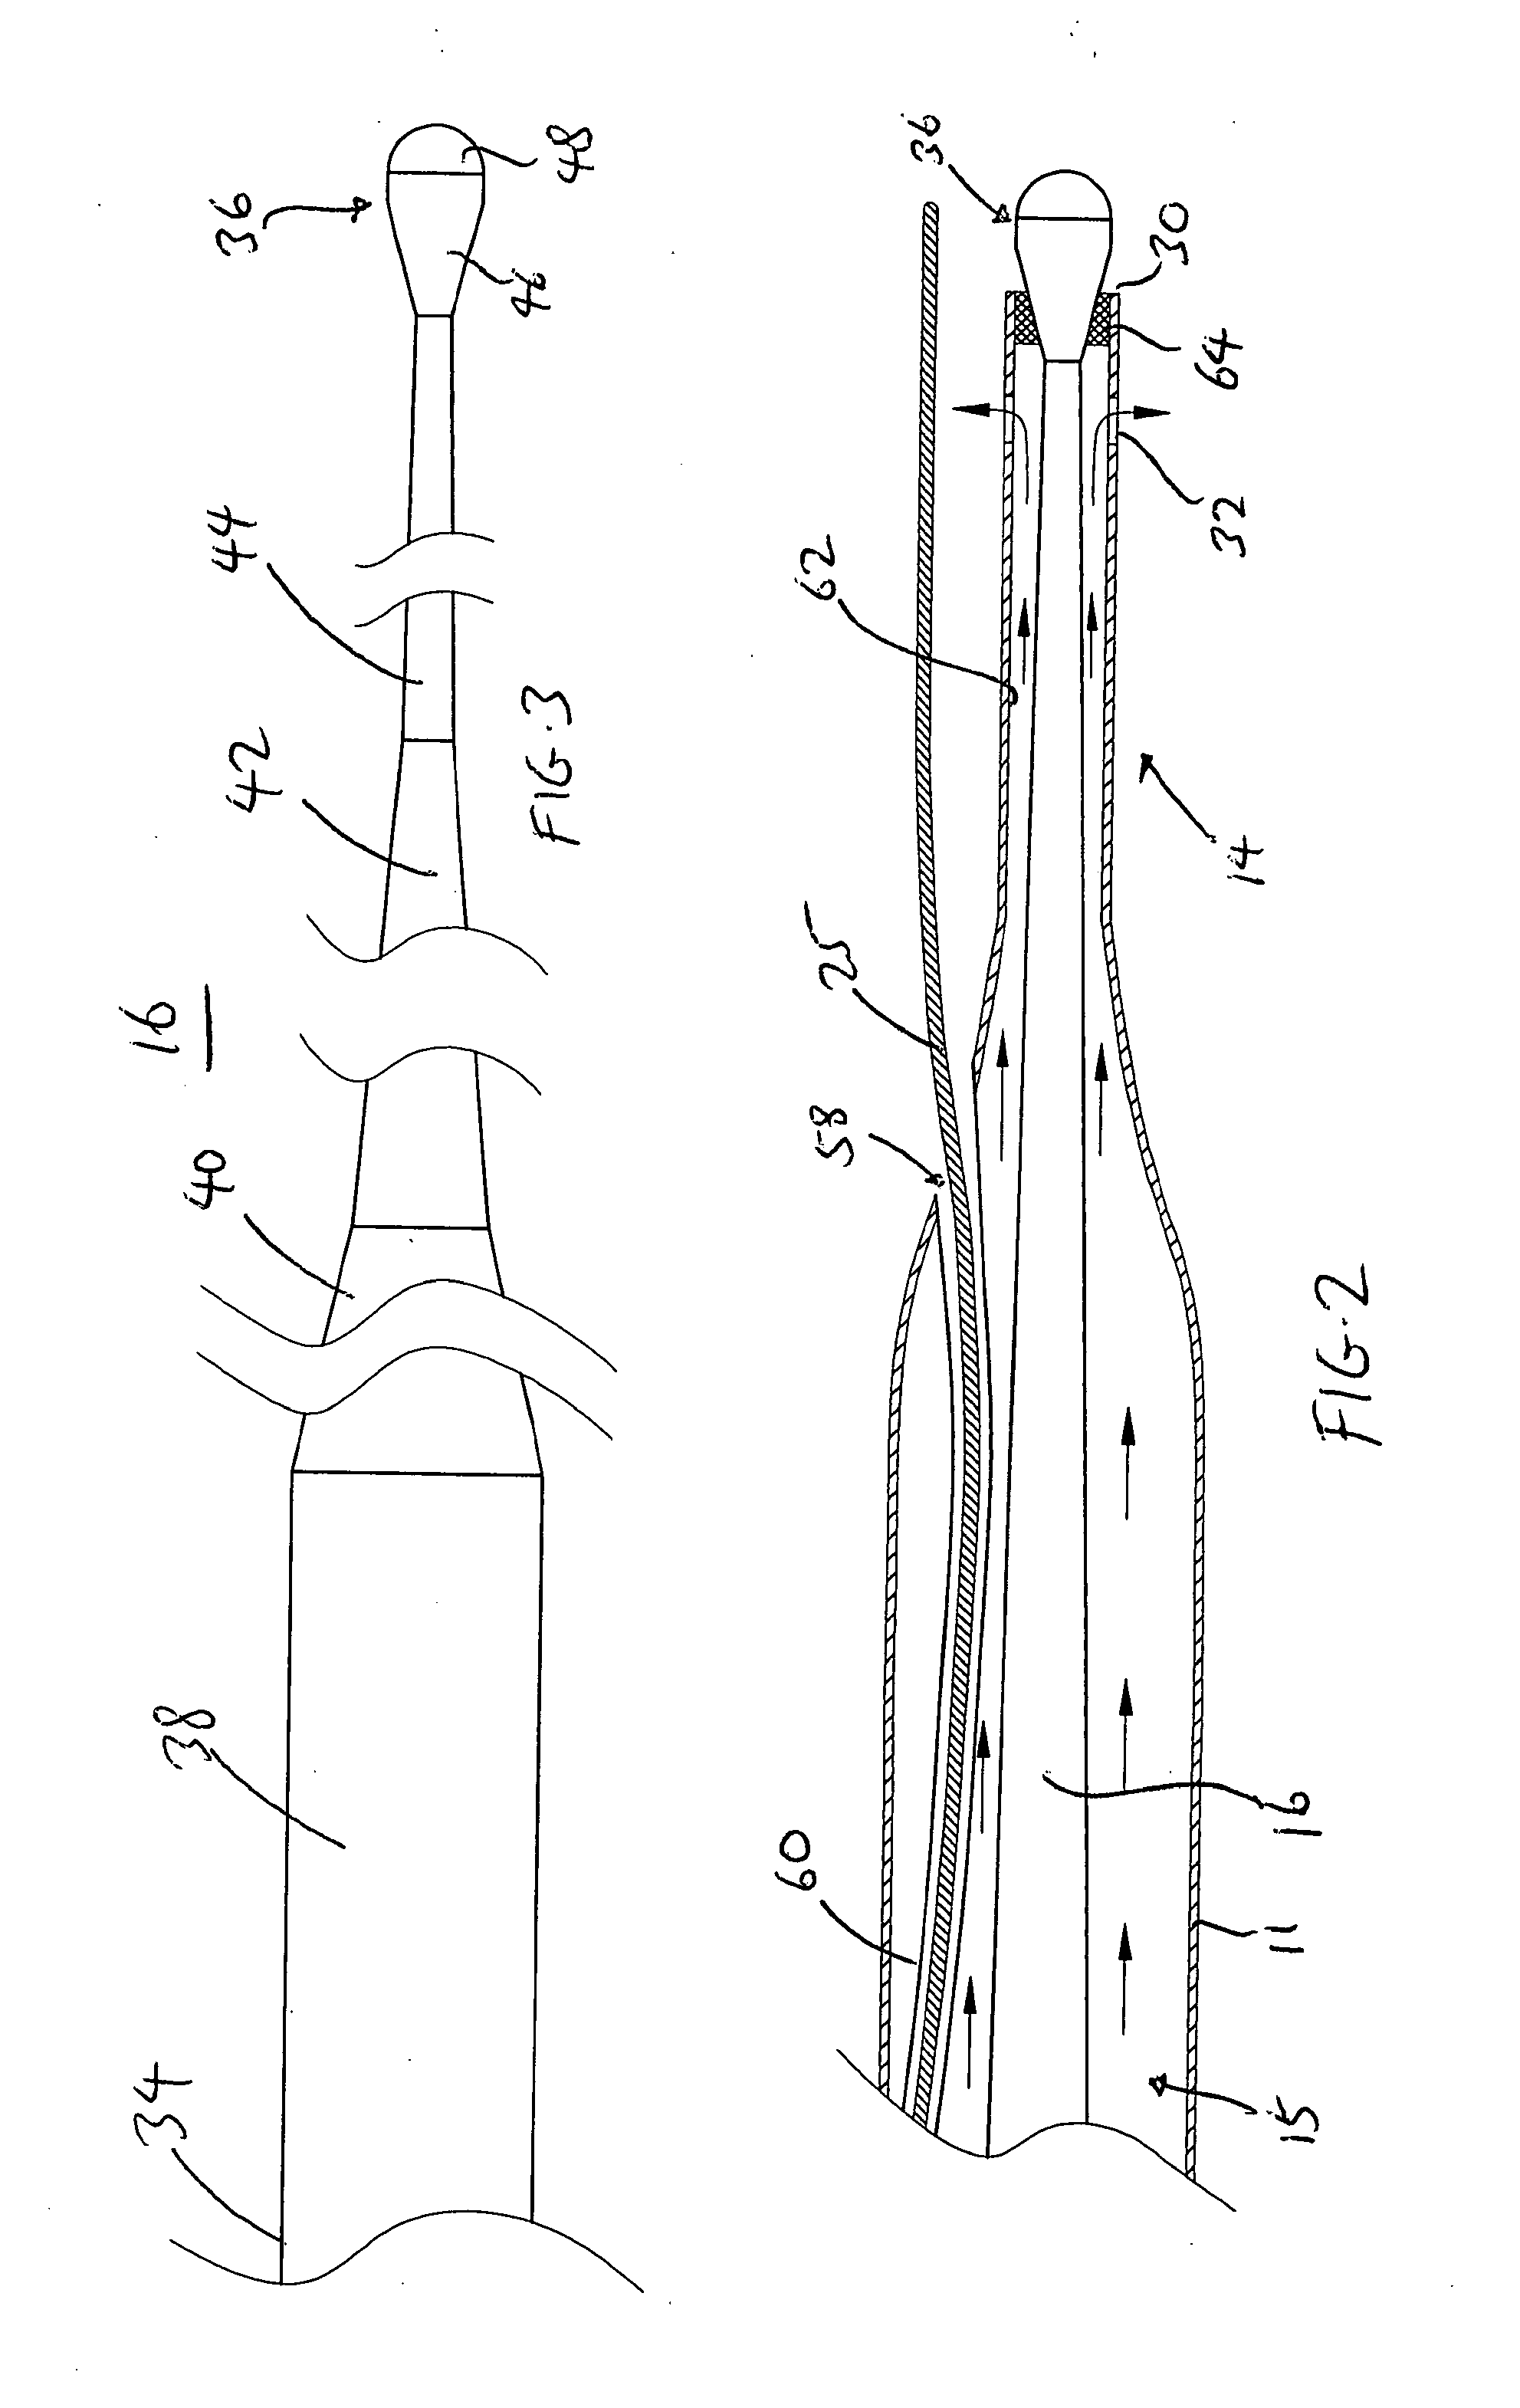 Ultrasound Catheter Having Protective Feature Against Breakage